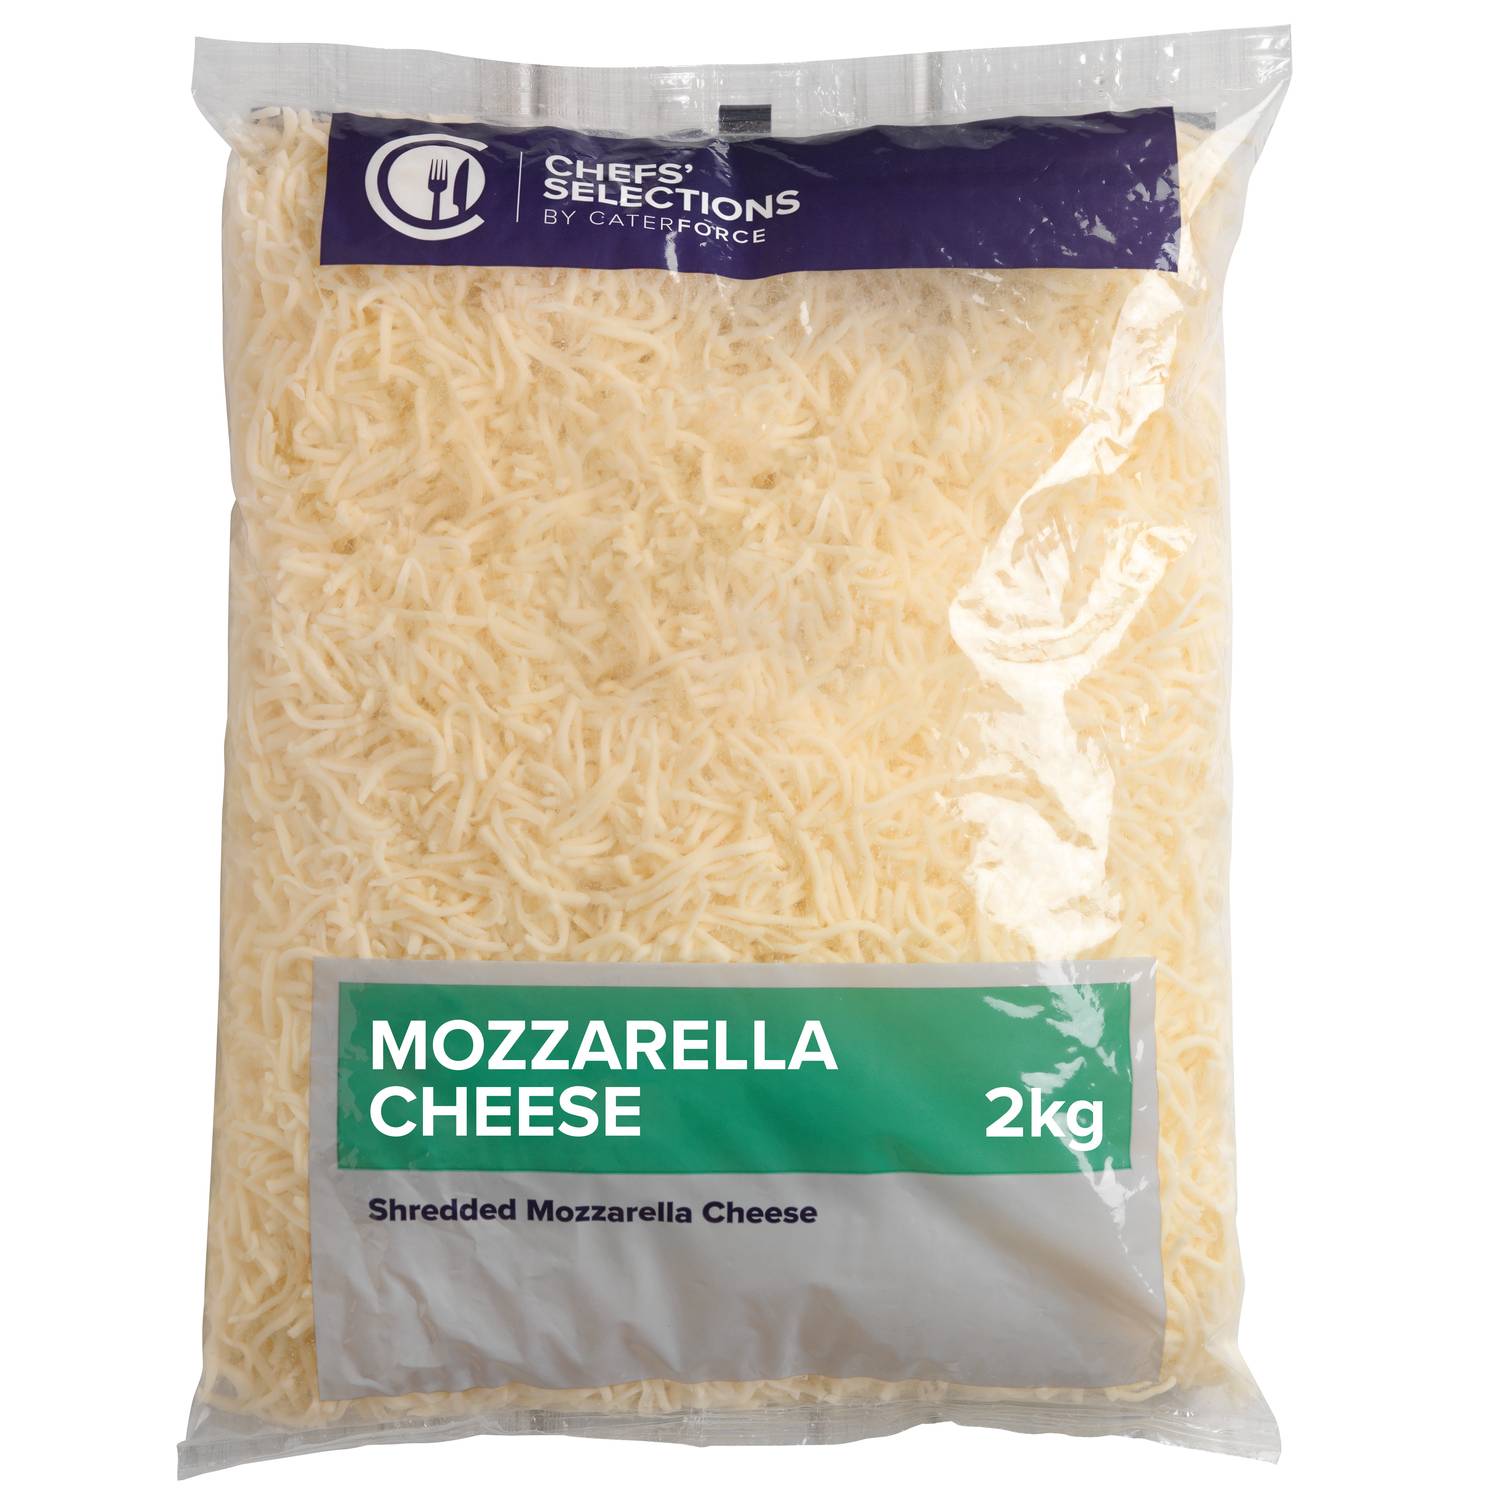 Chefs’ Selections Shredded Mozzarella Cheese (6 x 2kg)